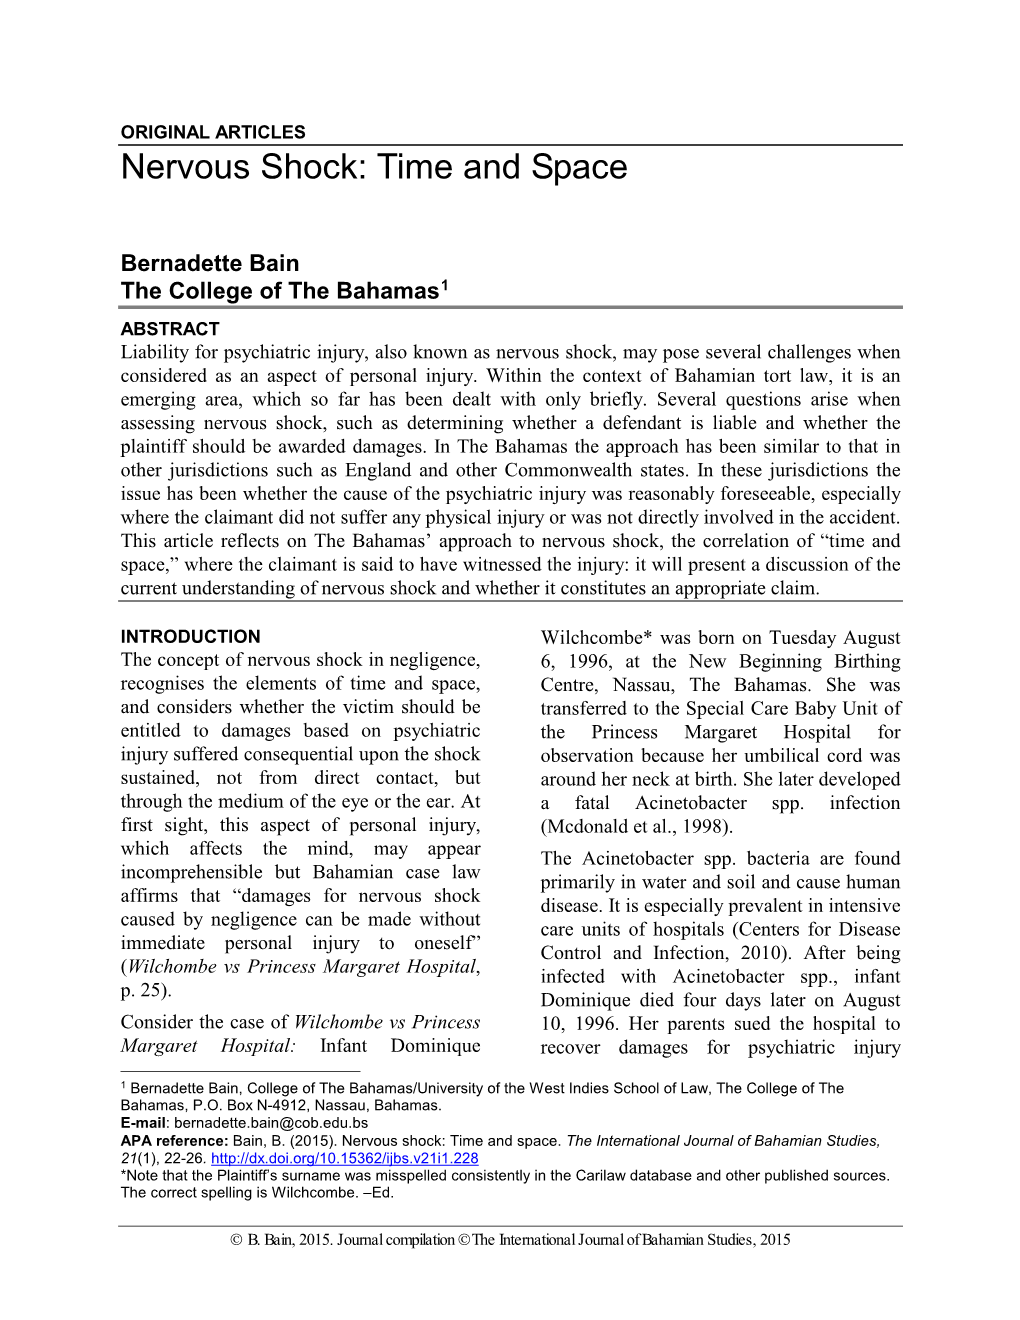 Nervous Shock: Time and Space